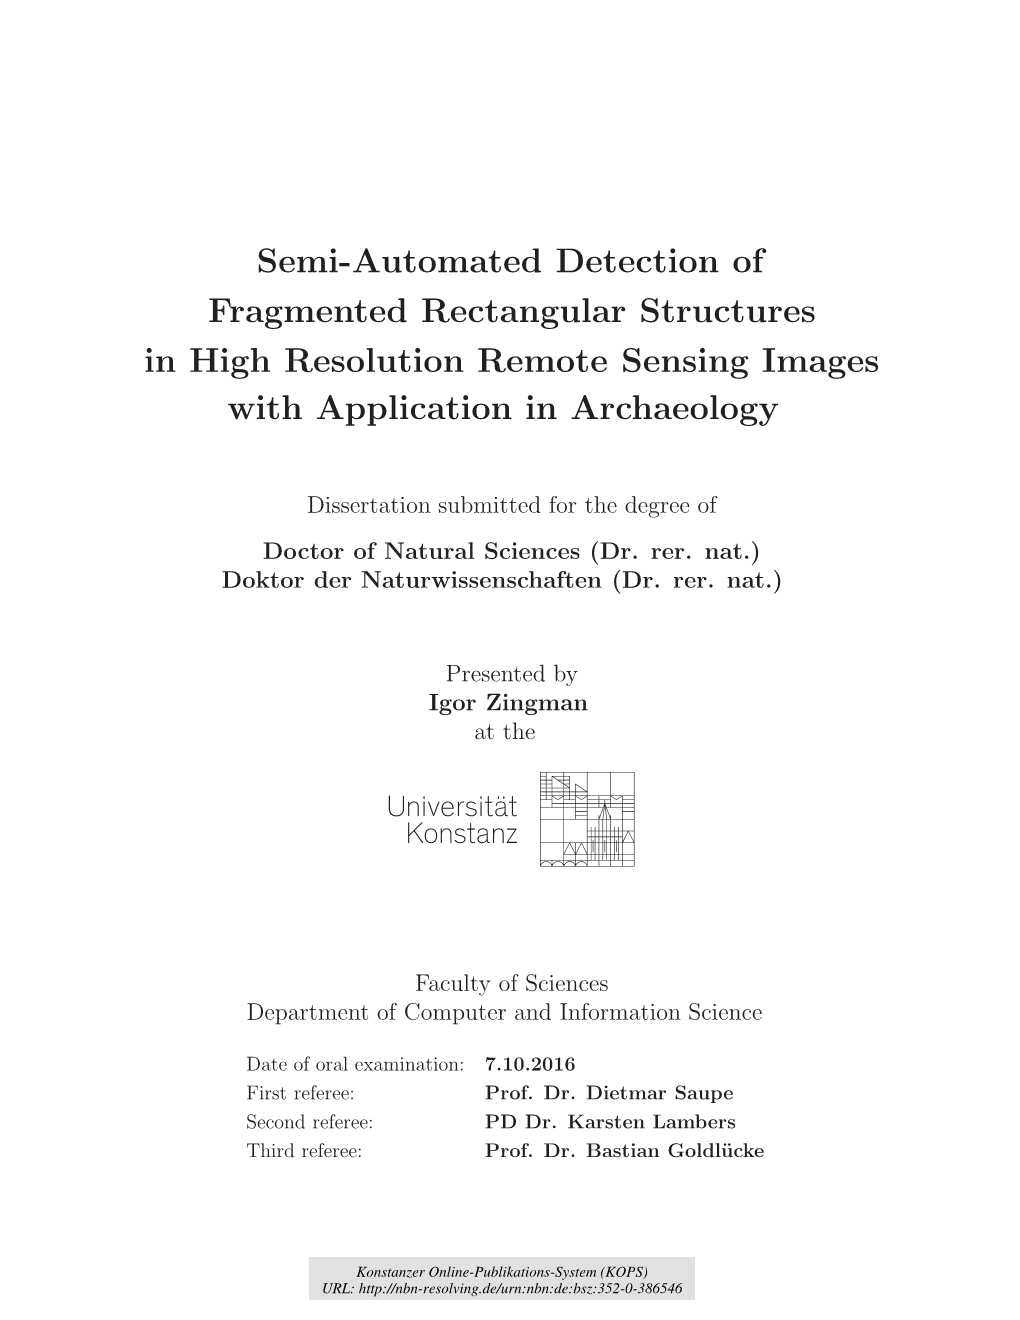 Semi-Automated Detection of Fragmented Rectangular Structures in High Resolution Remote Sensing Images with Application in Archaeology